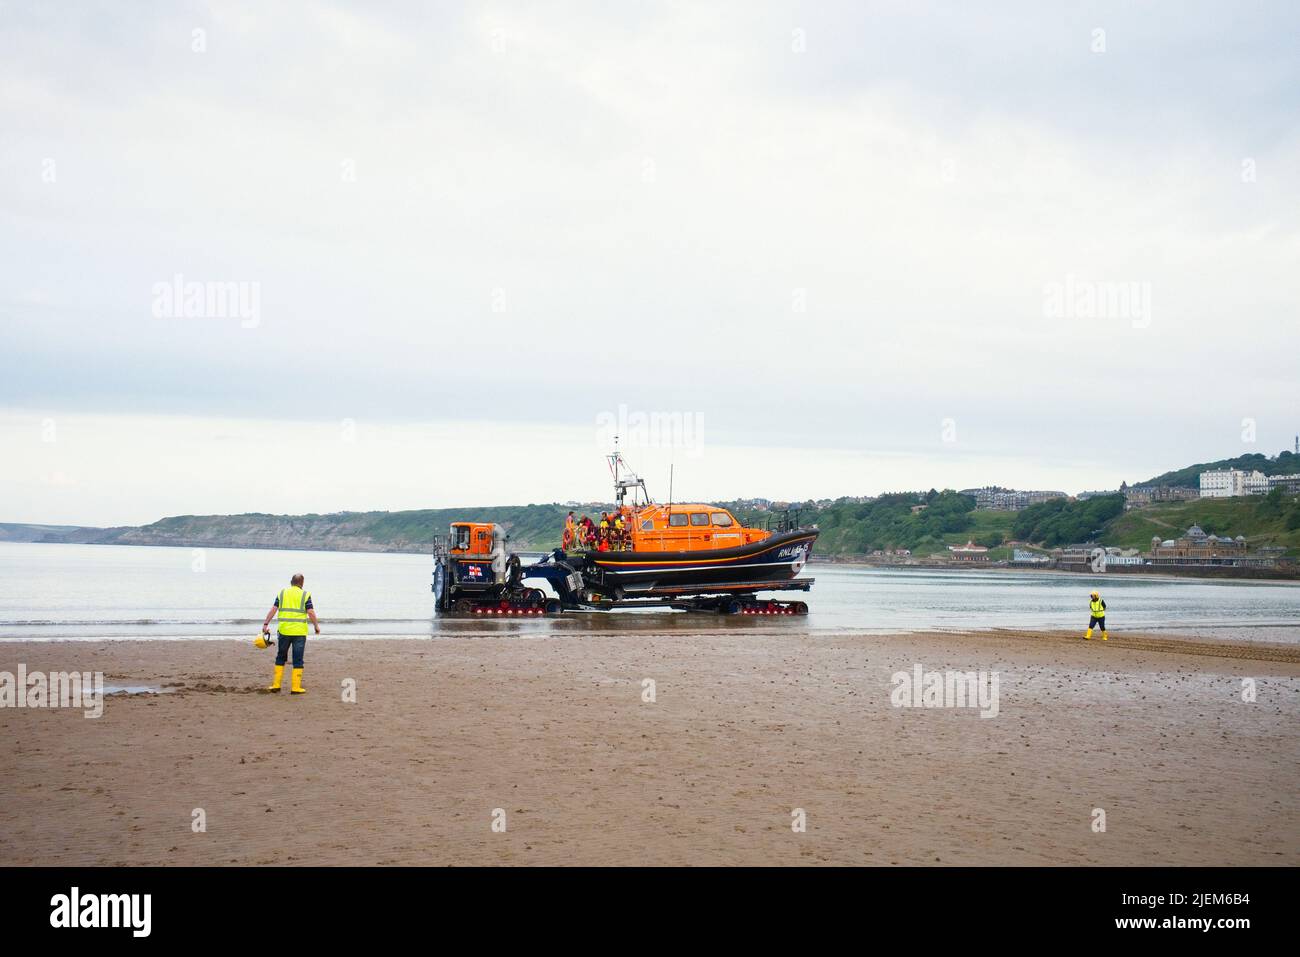 The Scarborough lifeboat being towed back into the lifeboat station after a Tuesday evening practice session Stock Photo